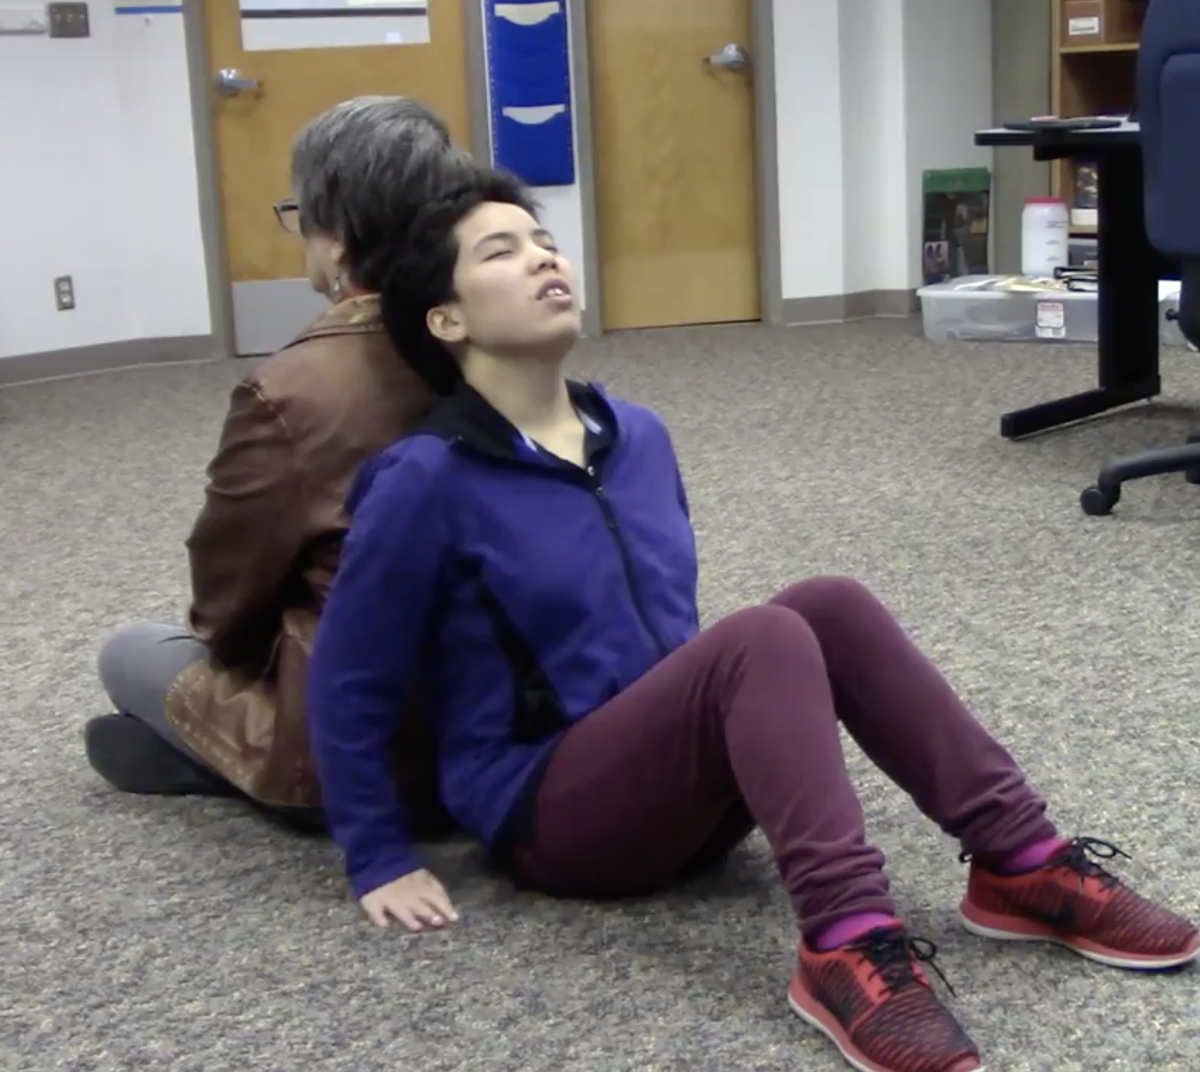 A woman and teenage girl sit back to back on a carpeted floor